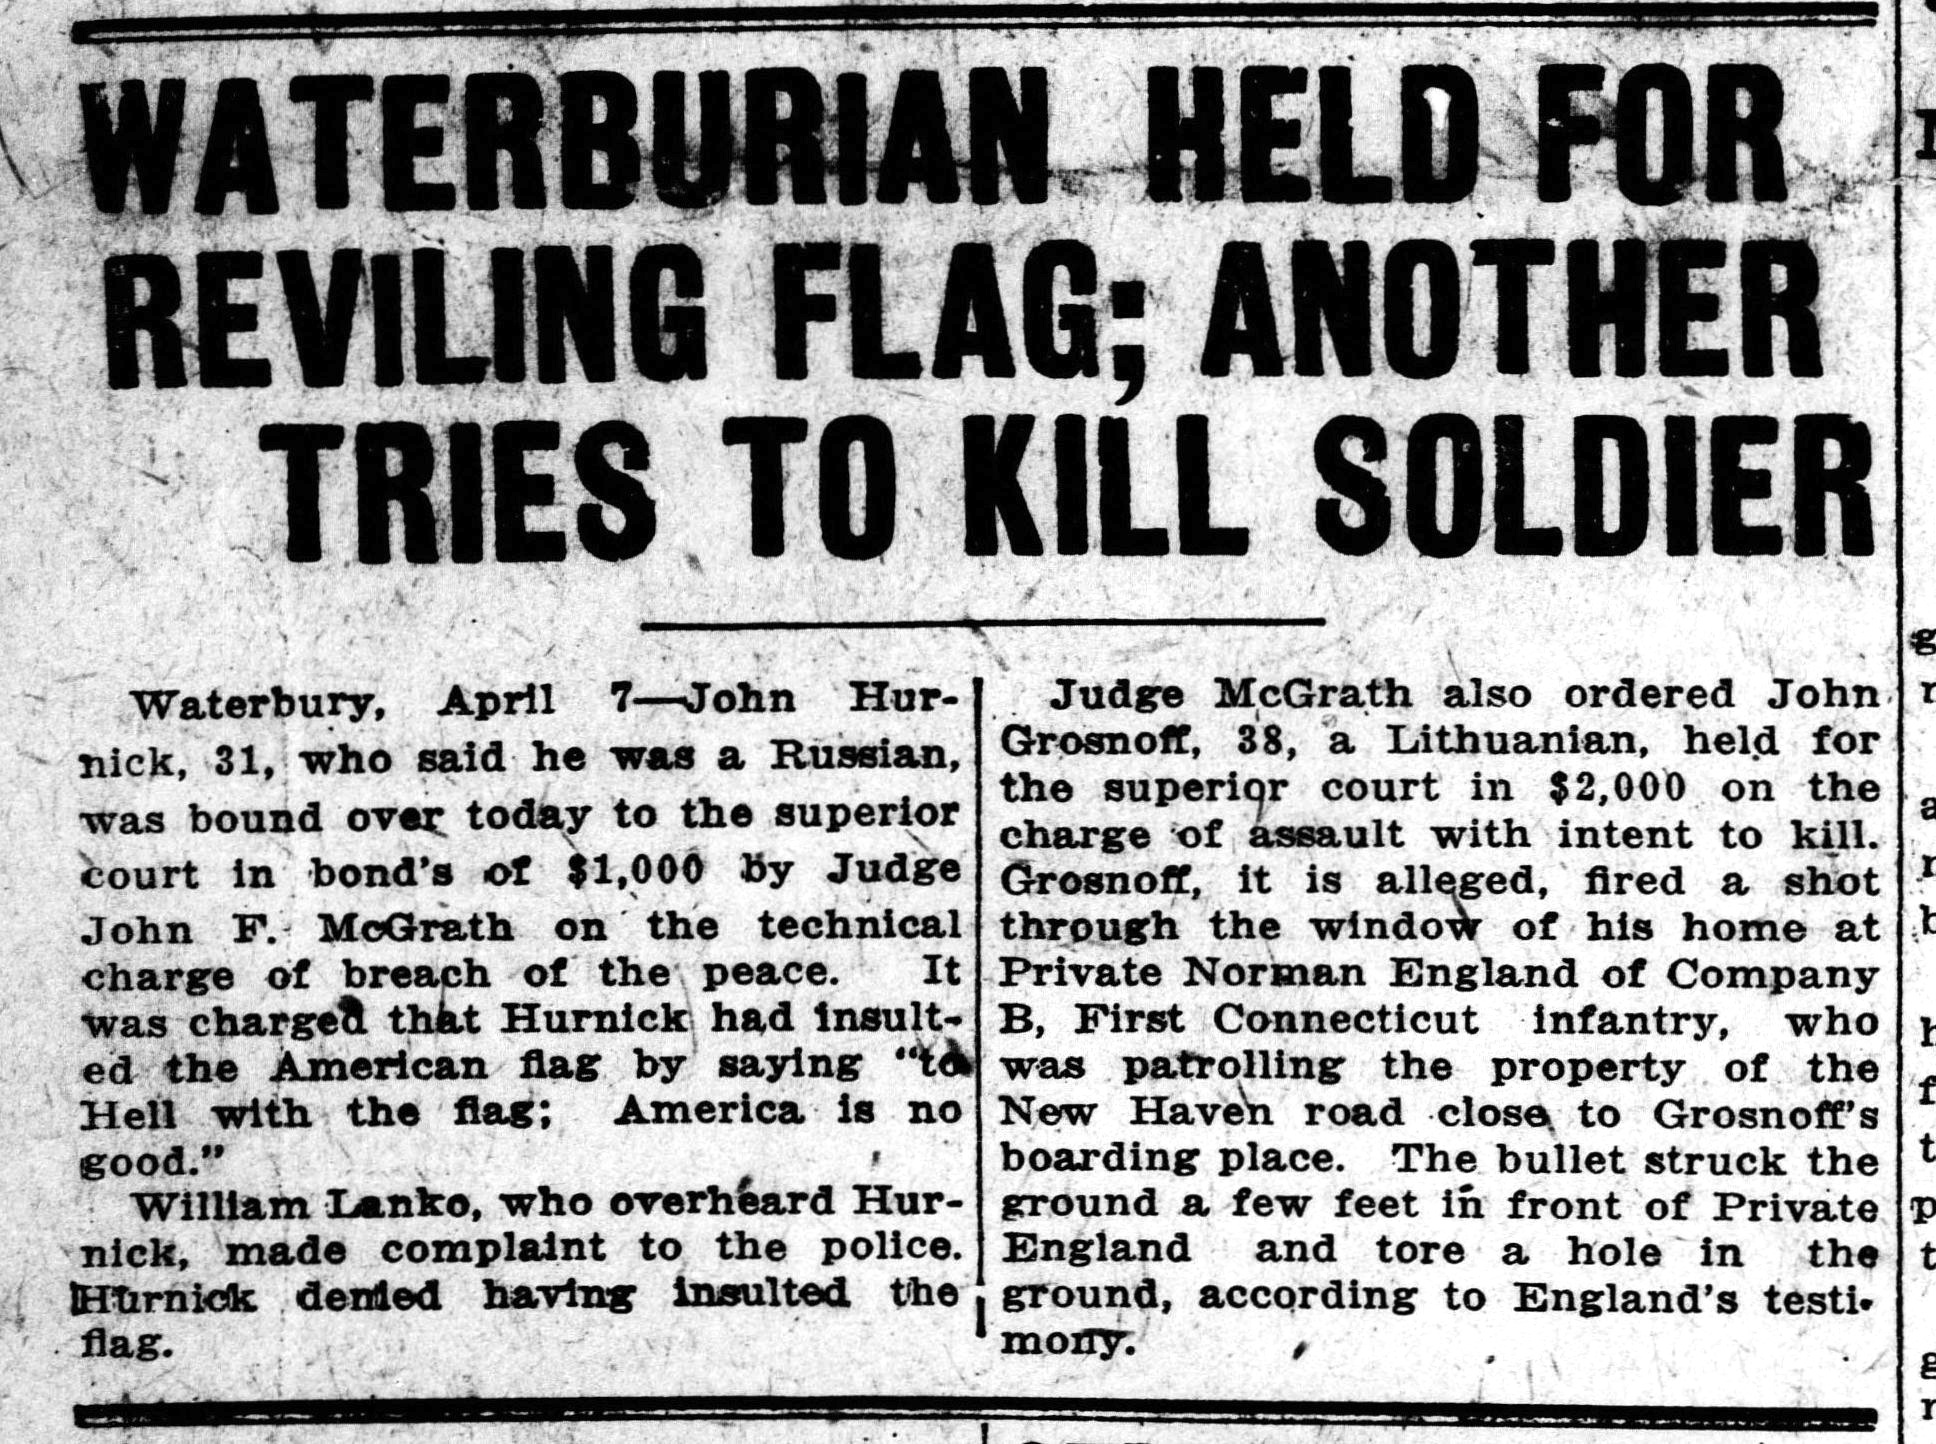 Waterburian Held for Reviling Flag; Another Tries to Kill Soldier